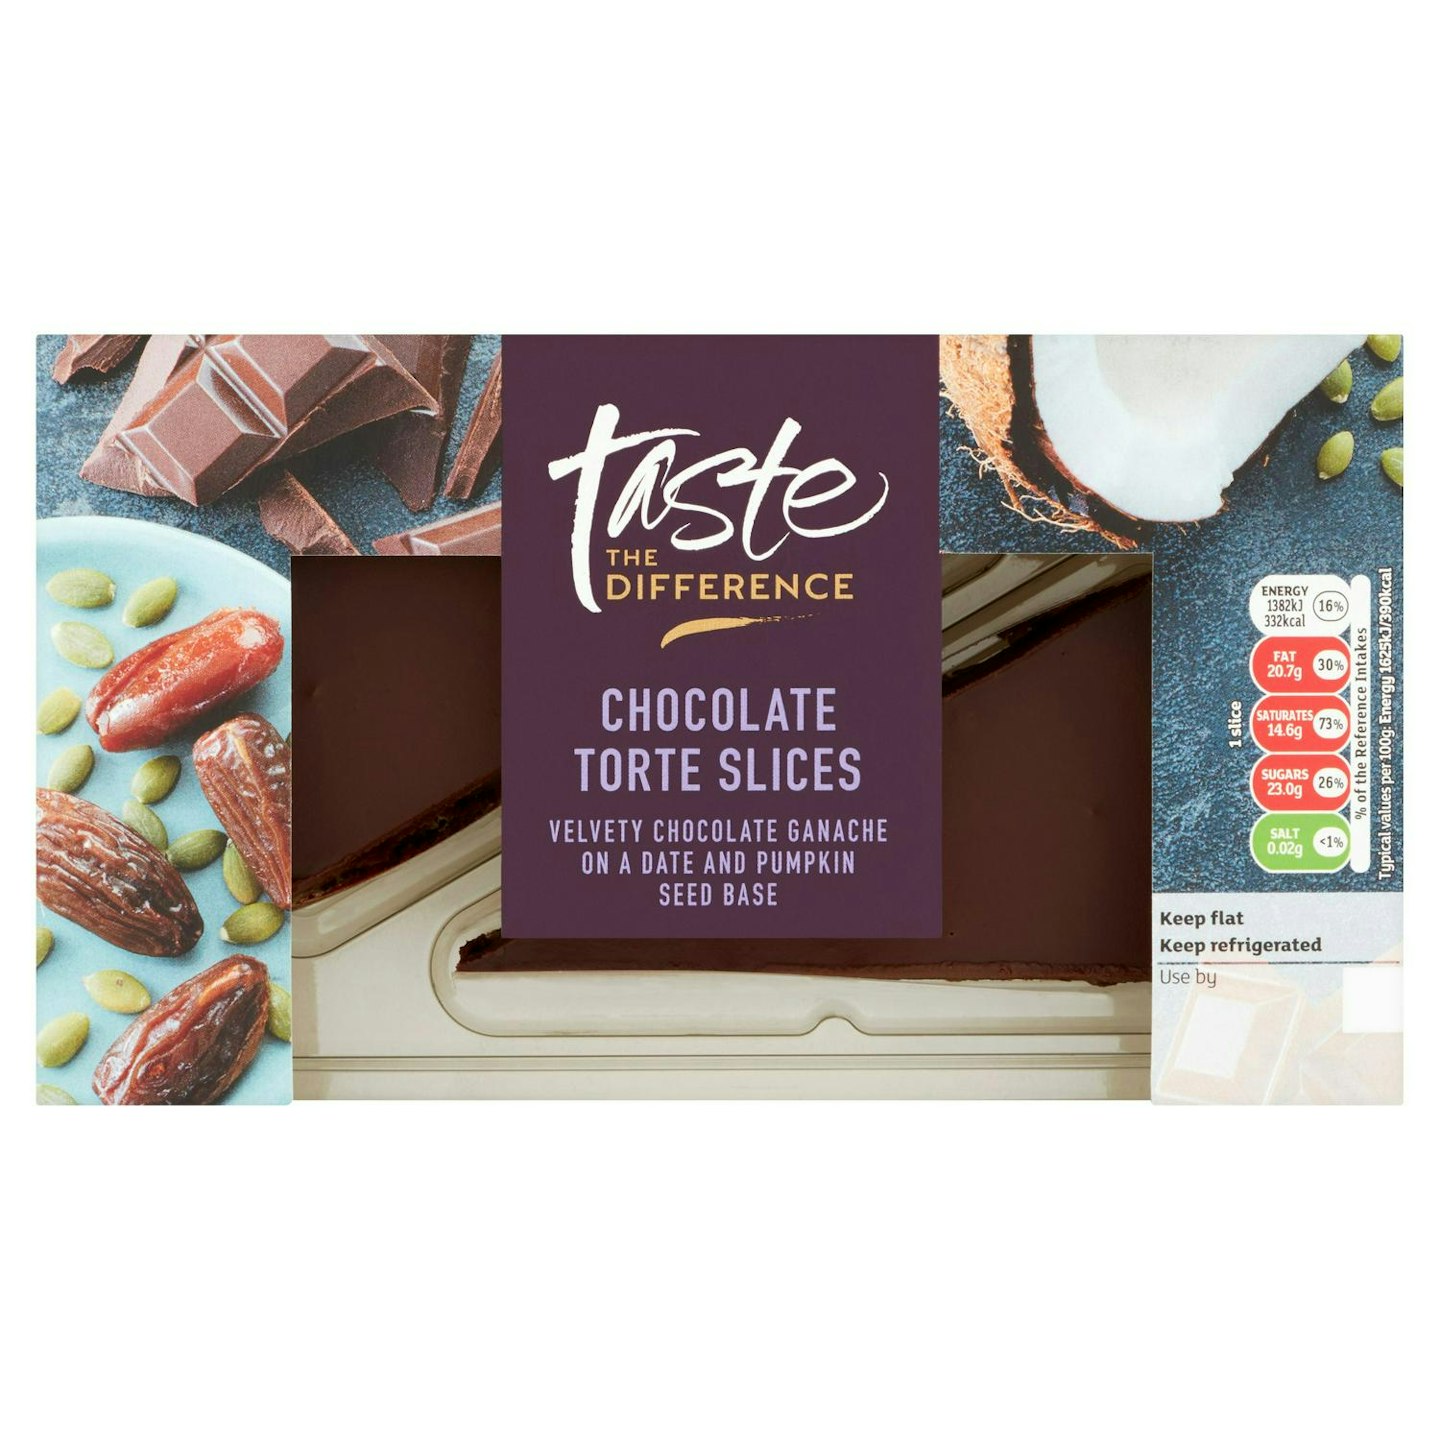 Sainsbury's Belgian Chocolate Torte Slices 2, Taste the Difference x85g